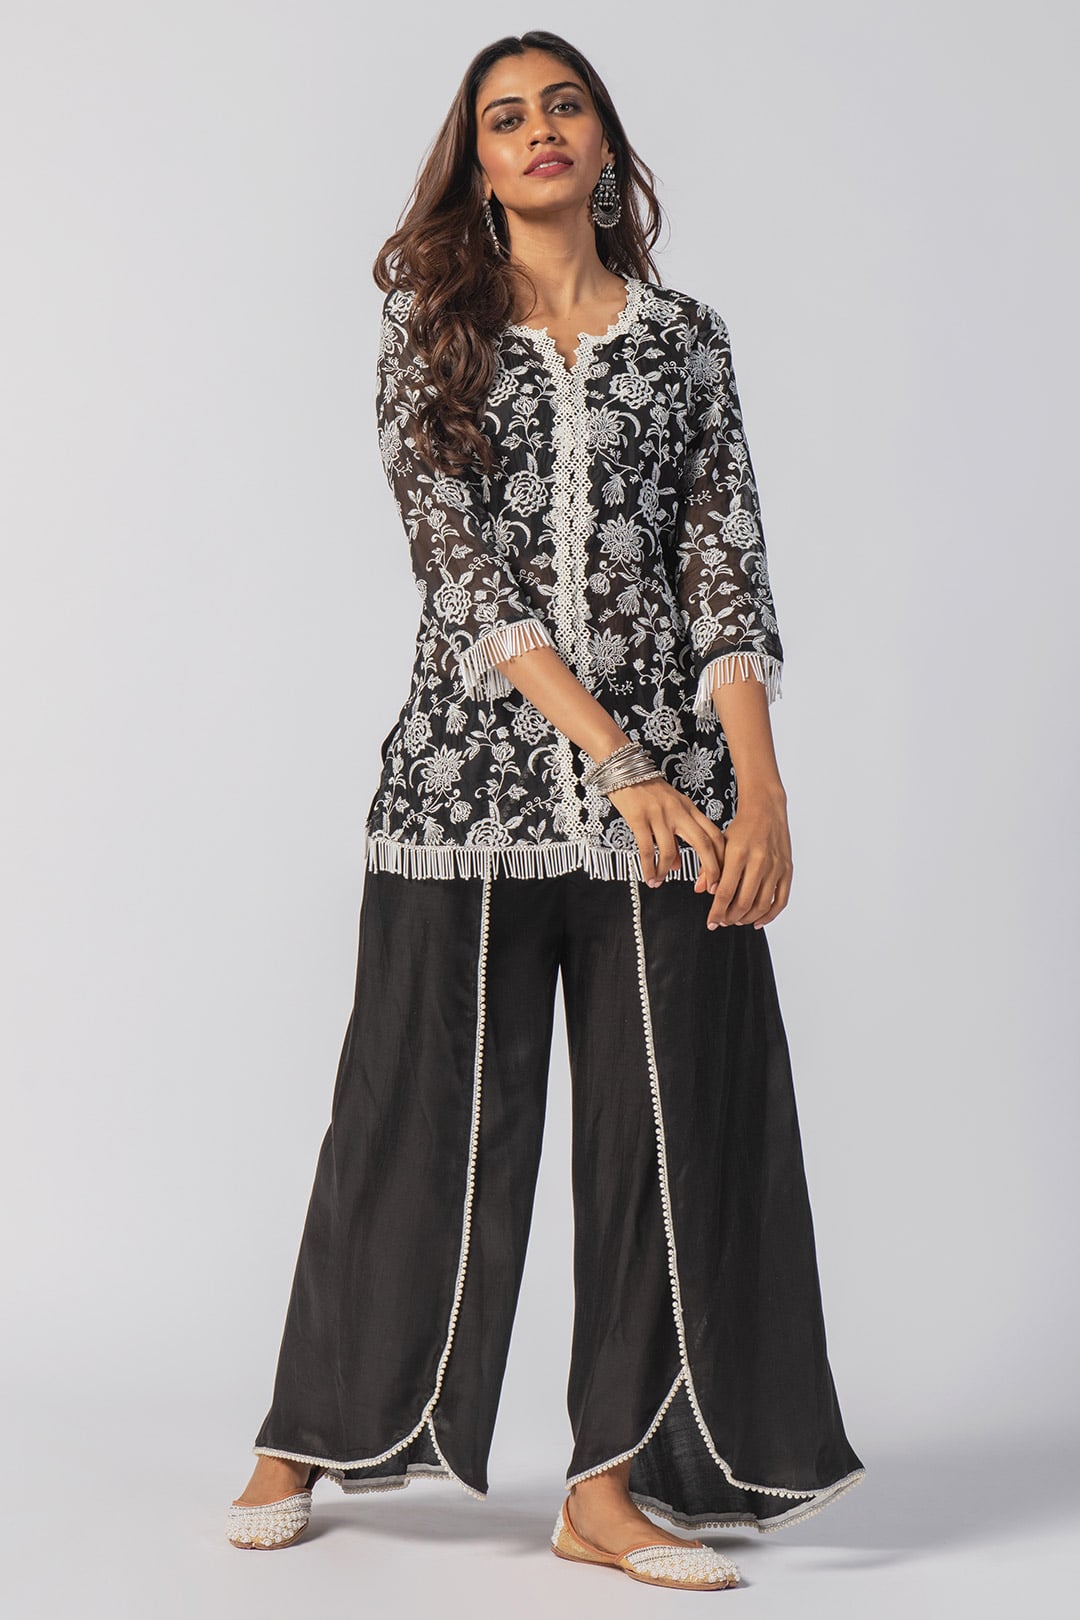 Mulmul Tencel Luxe Organza Claire Black Kurta With Cupro Claire Dhoti Black Pant